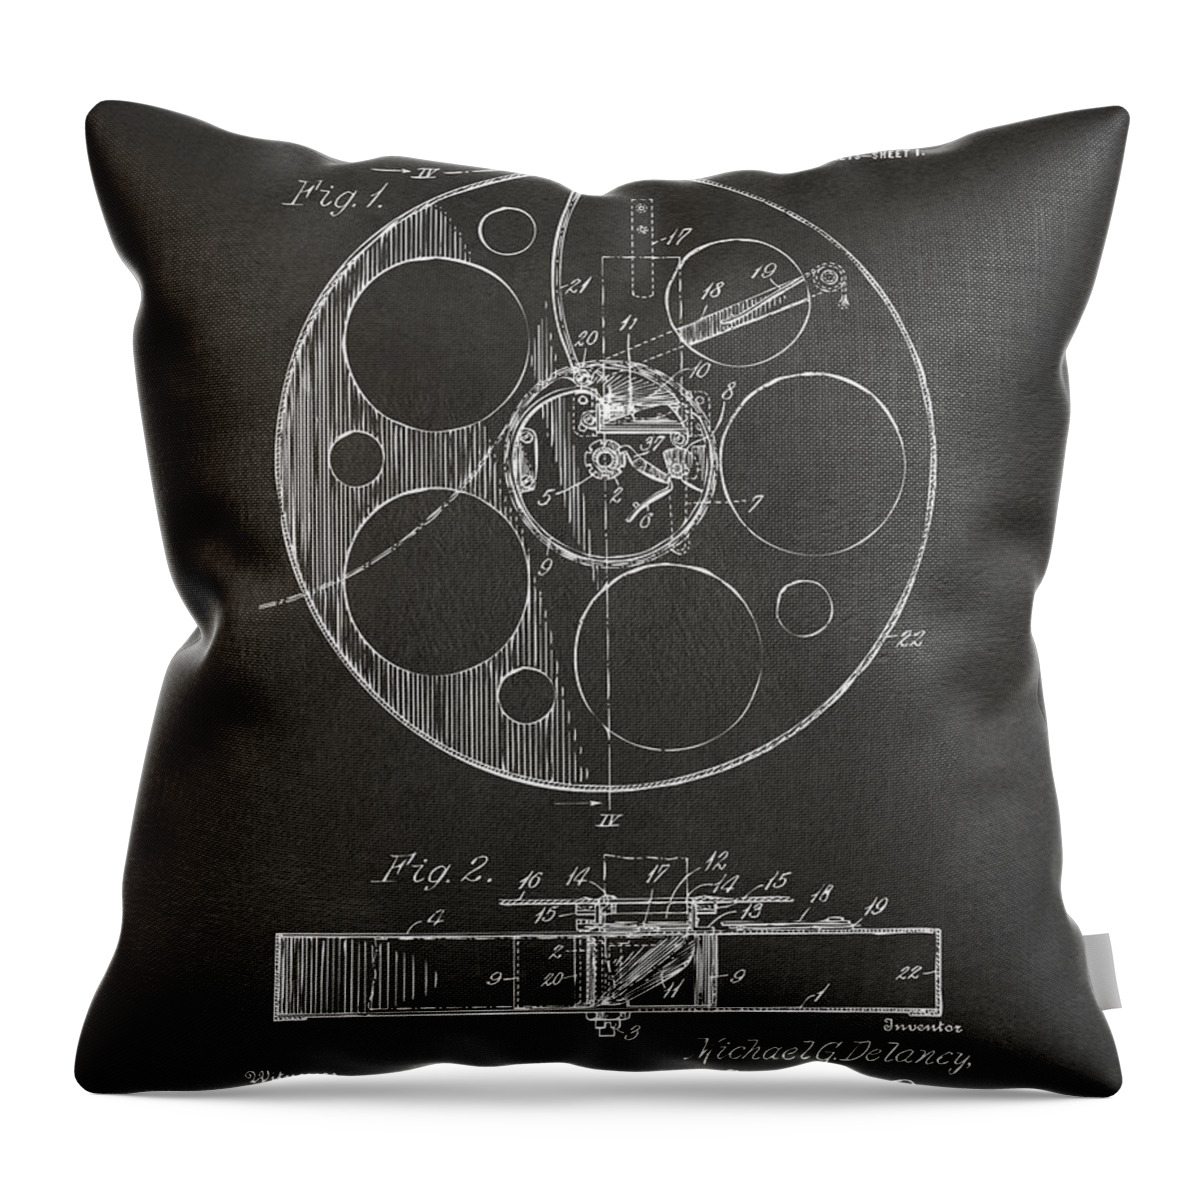 Movie Throw Pillow featuring the digital art 1915 Movie Film Reel Patent Gray by Nikki Marie Smith